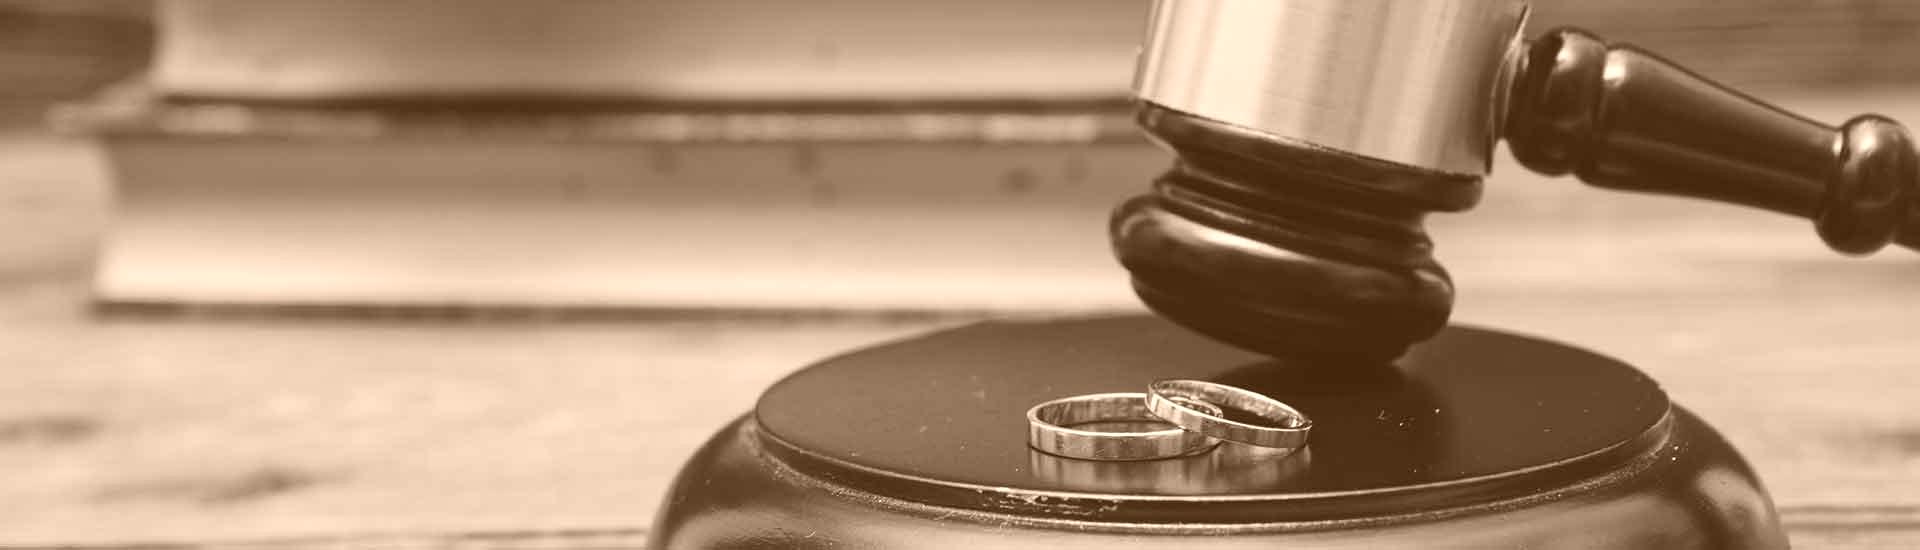 judges gavel next to two wedding rings